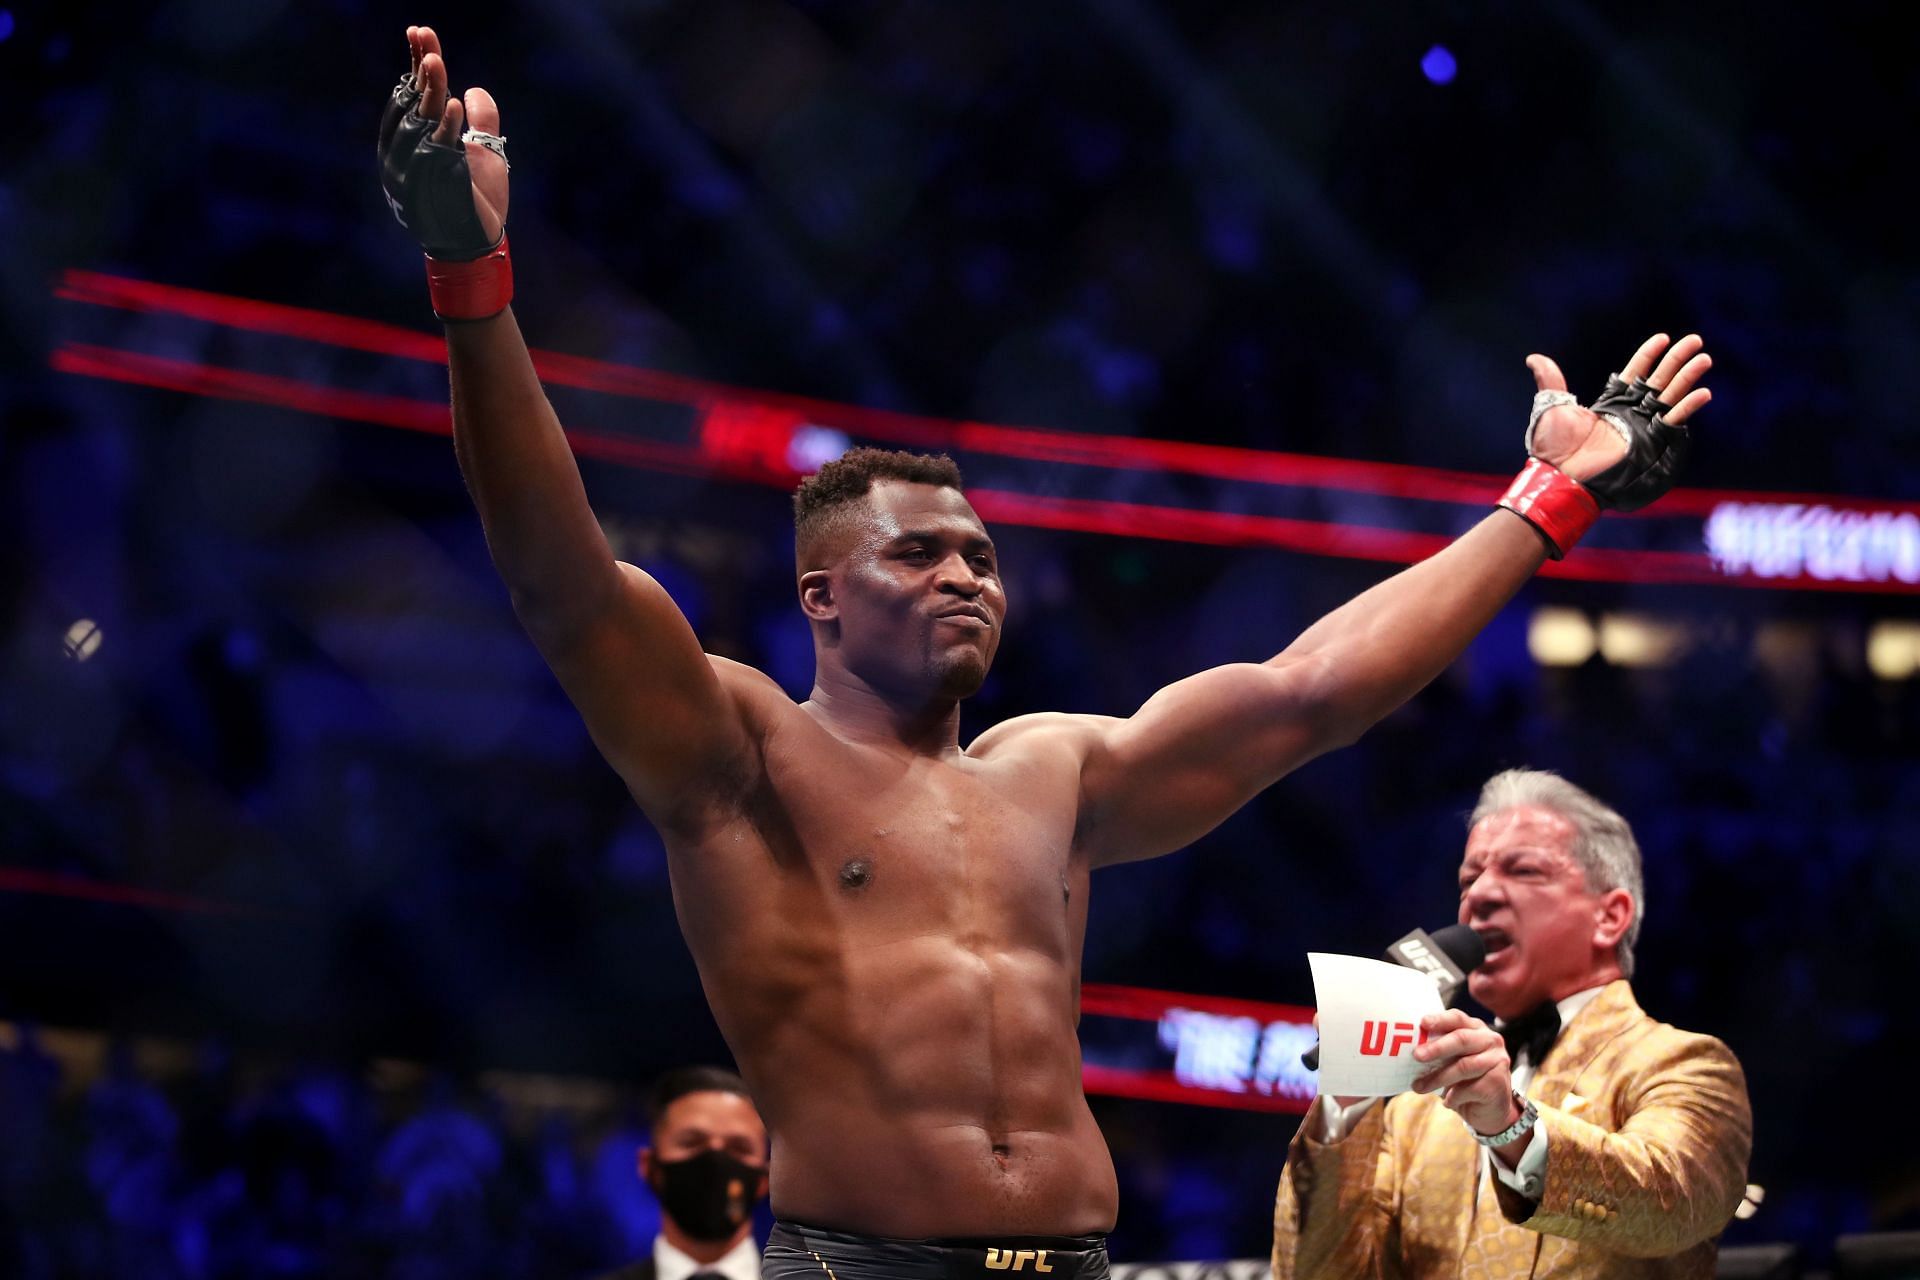 Could we see Francis Ngannou face Jon Jones in 2023?